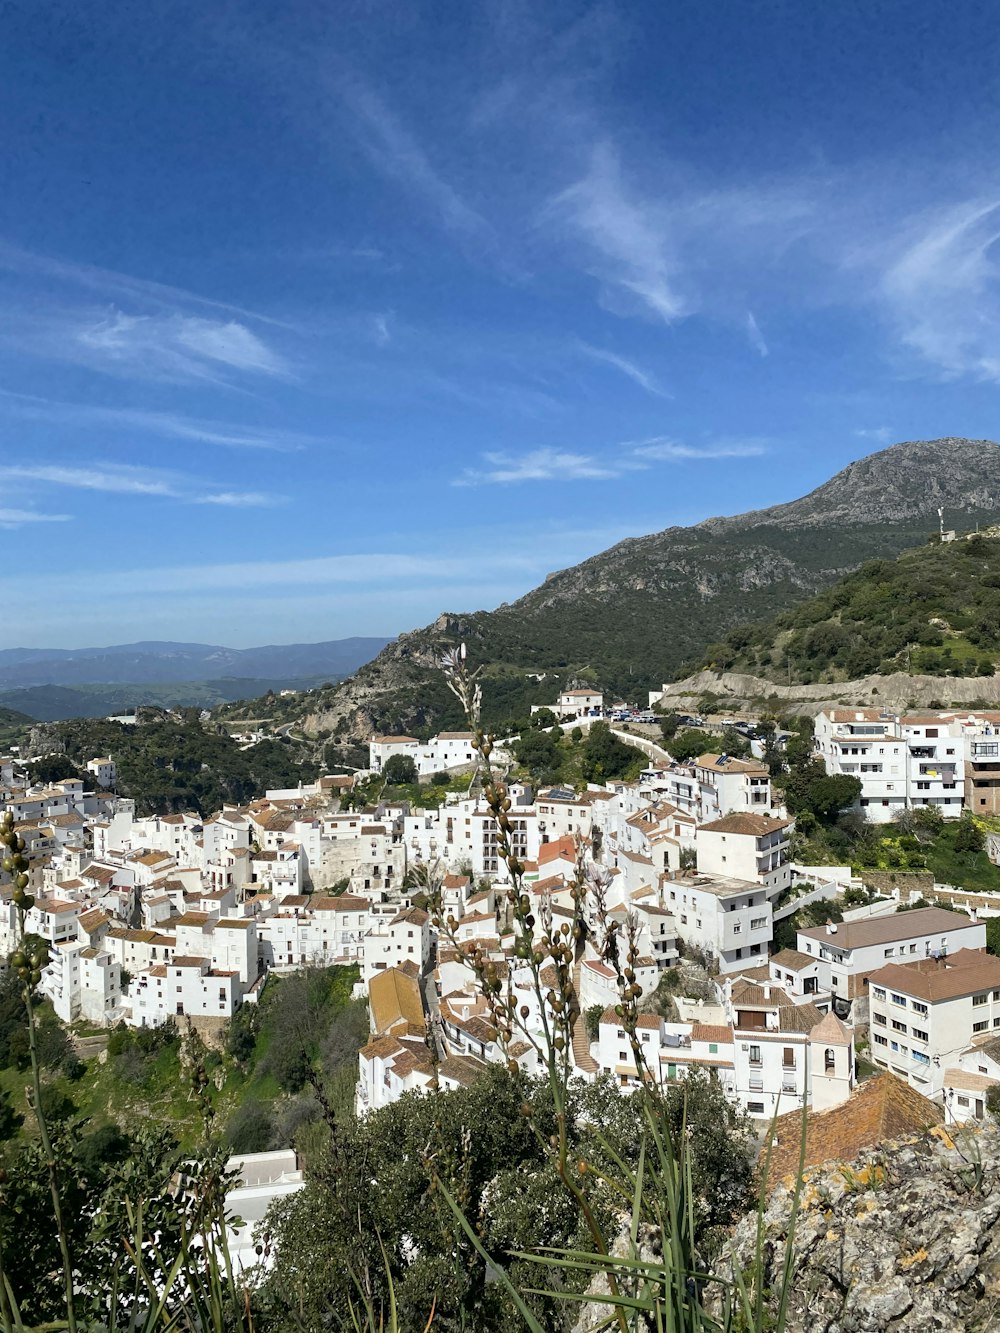 a view of a town from the top of a hill